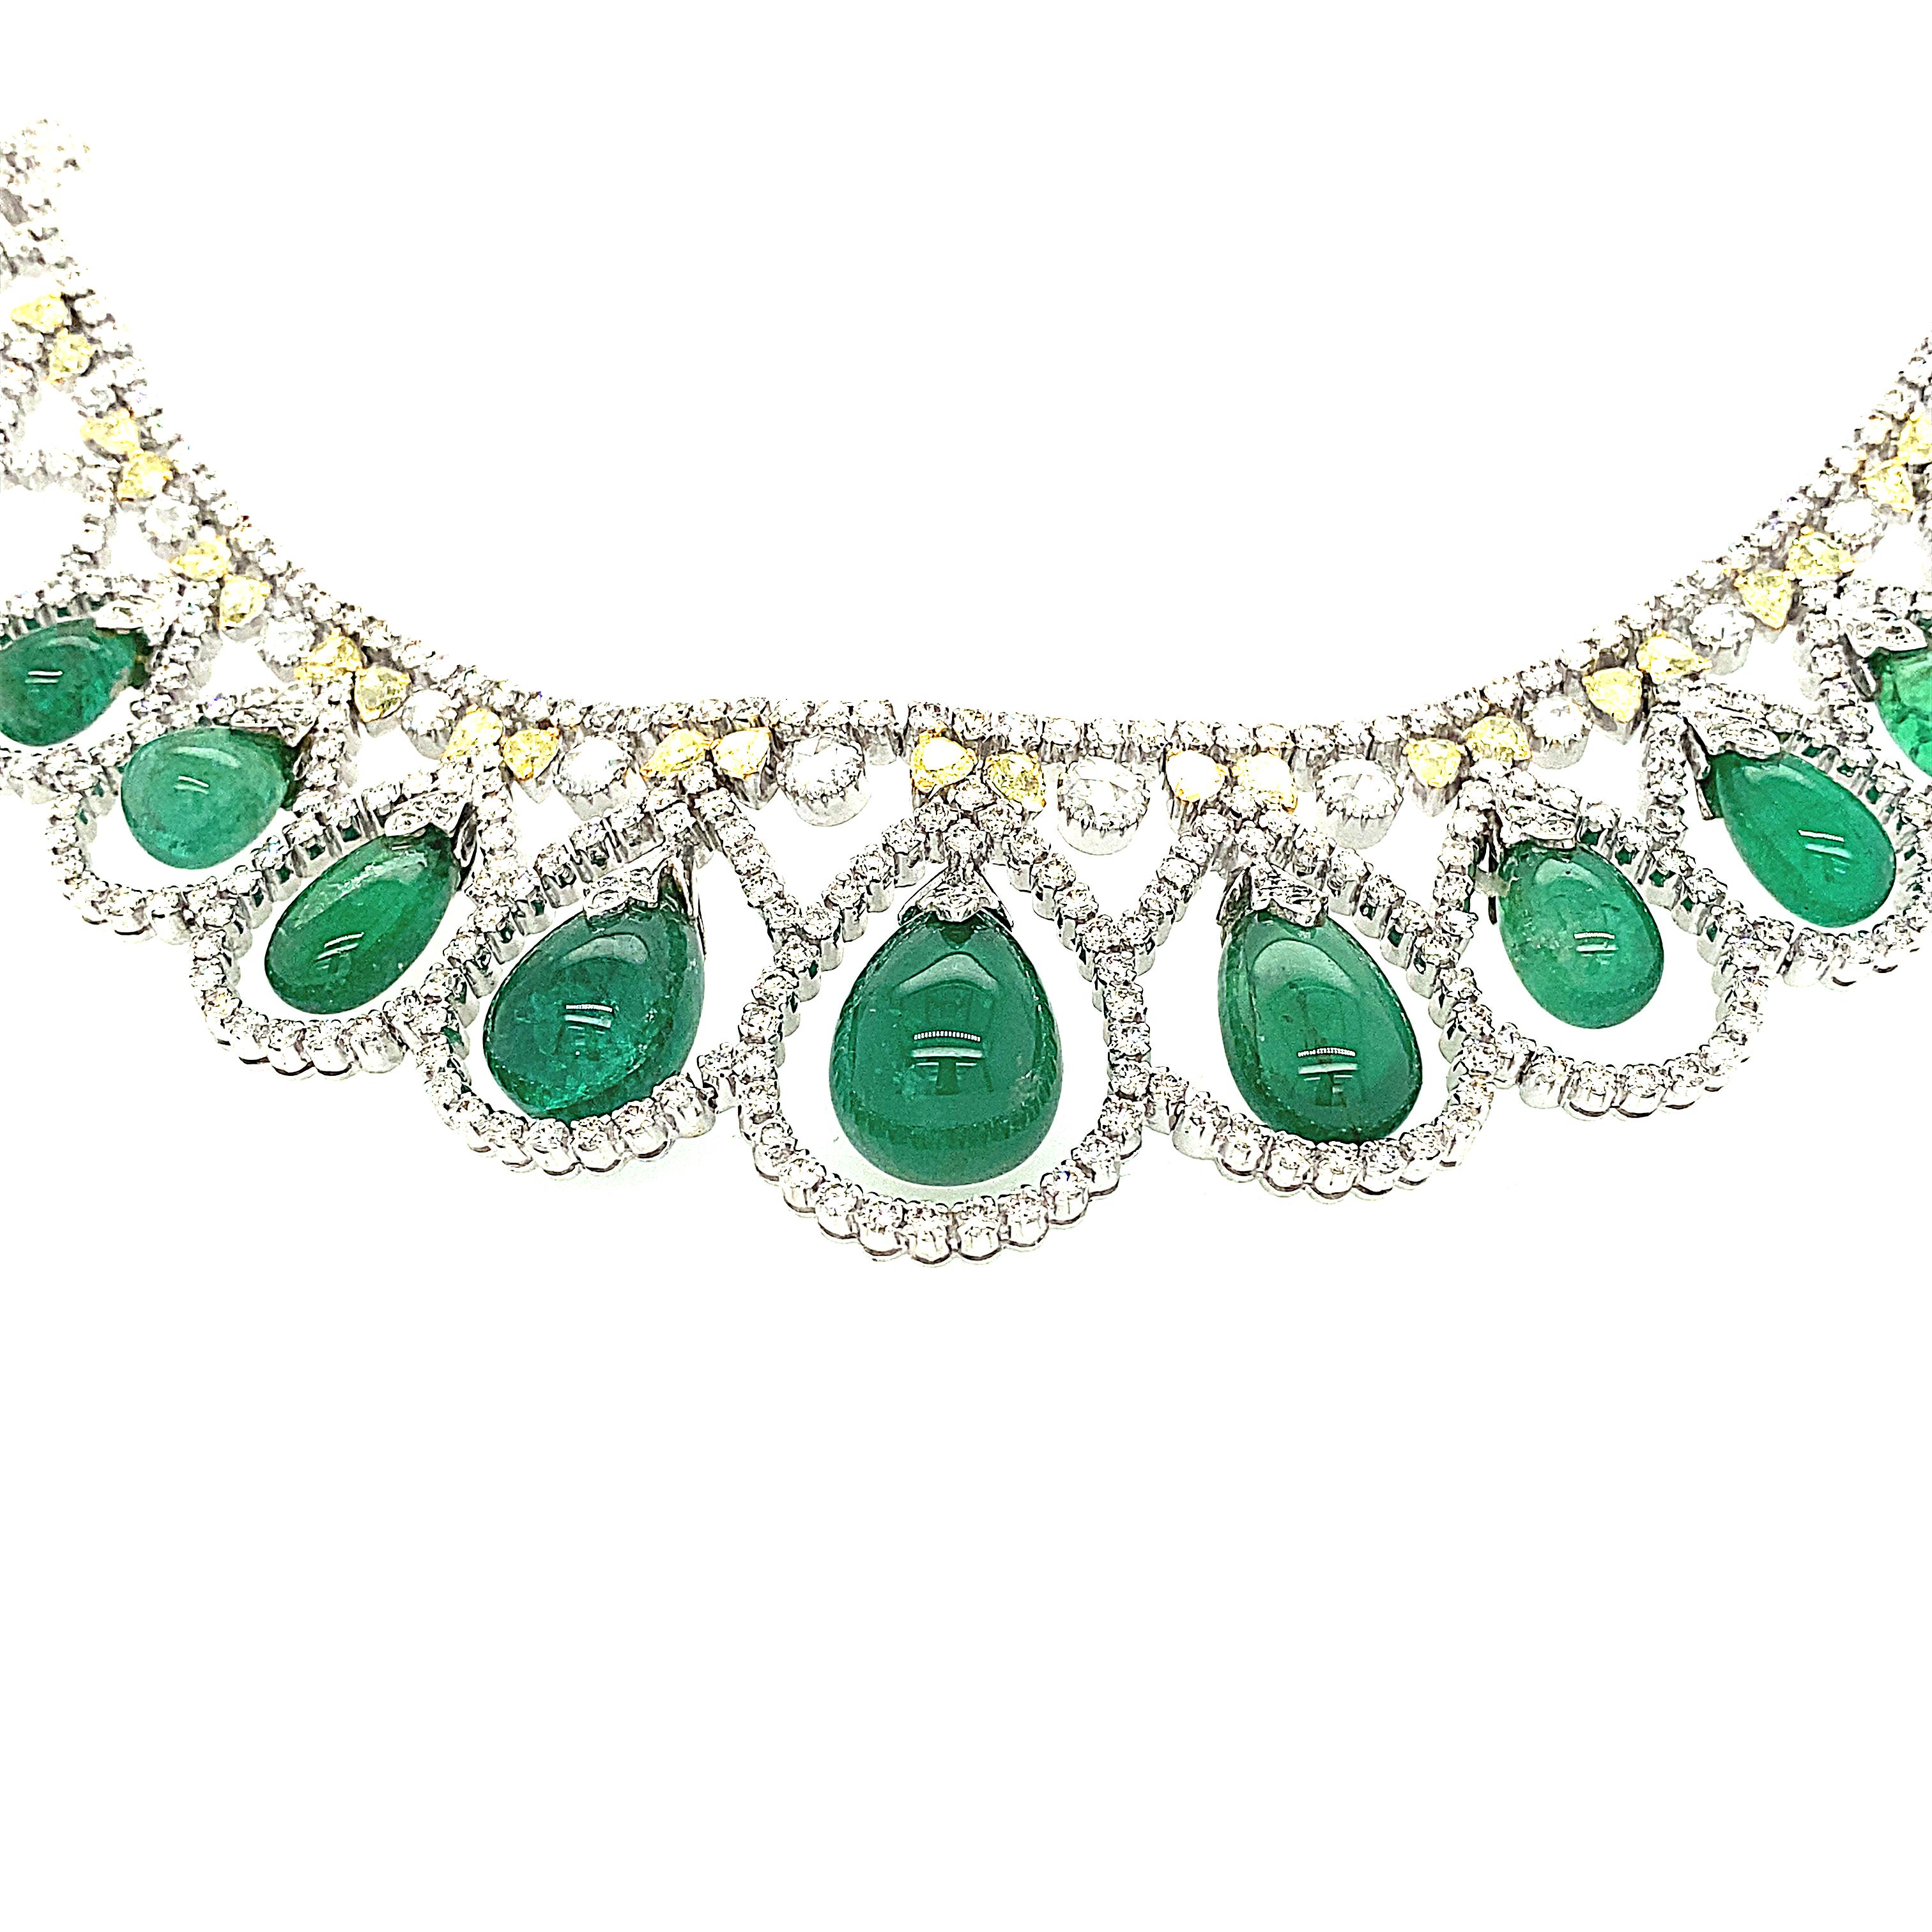 Magnificent Cabochon teardrop shape Emerald and Diamond collier/necklace. There are 74.70 carats of emeralds and 29.19 carats of yellow and white diamonds in 18K white gold. One of a kind, handmade, an extraordinary piece of jewelry.